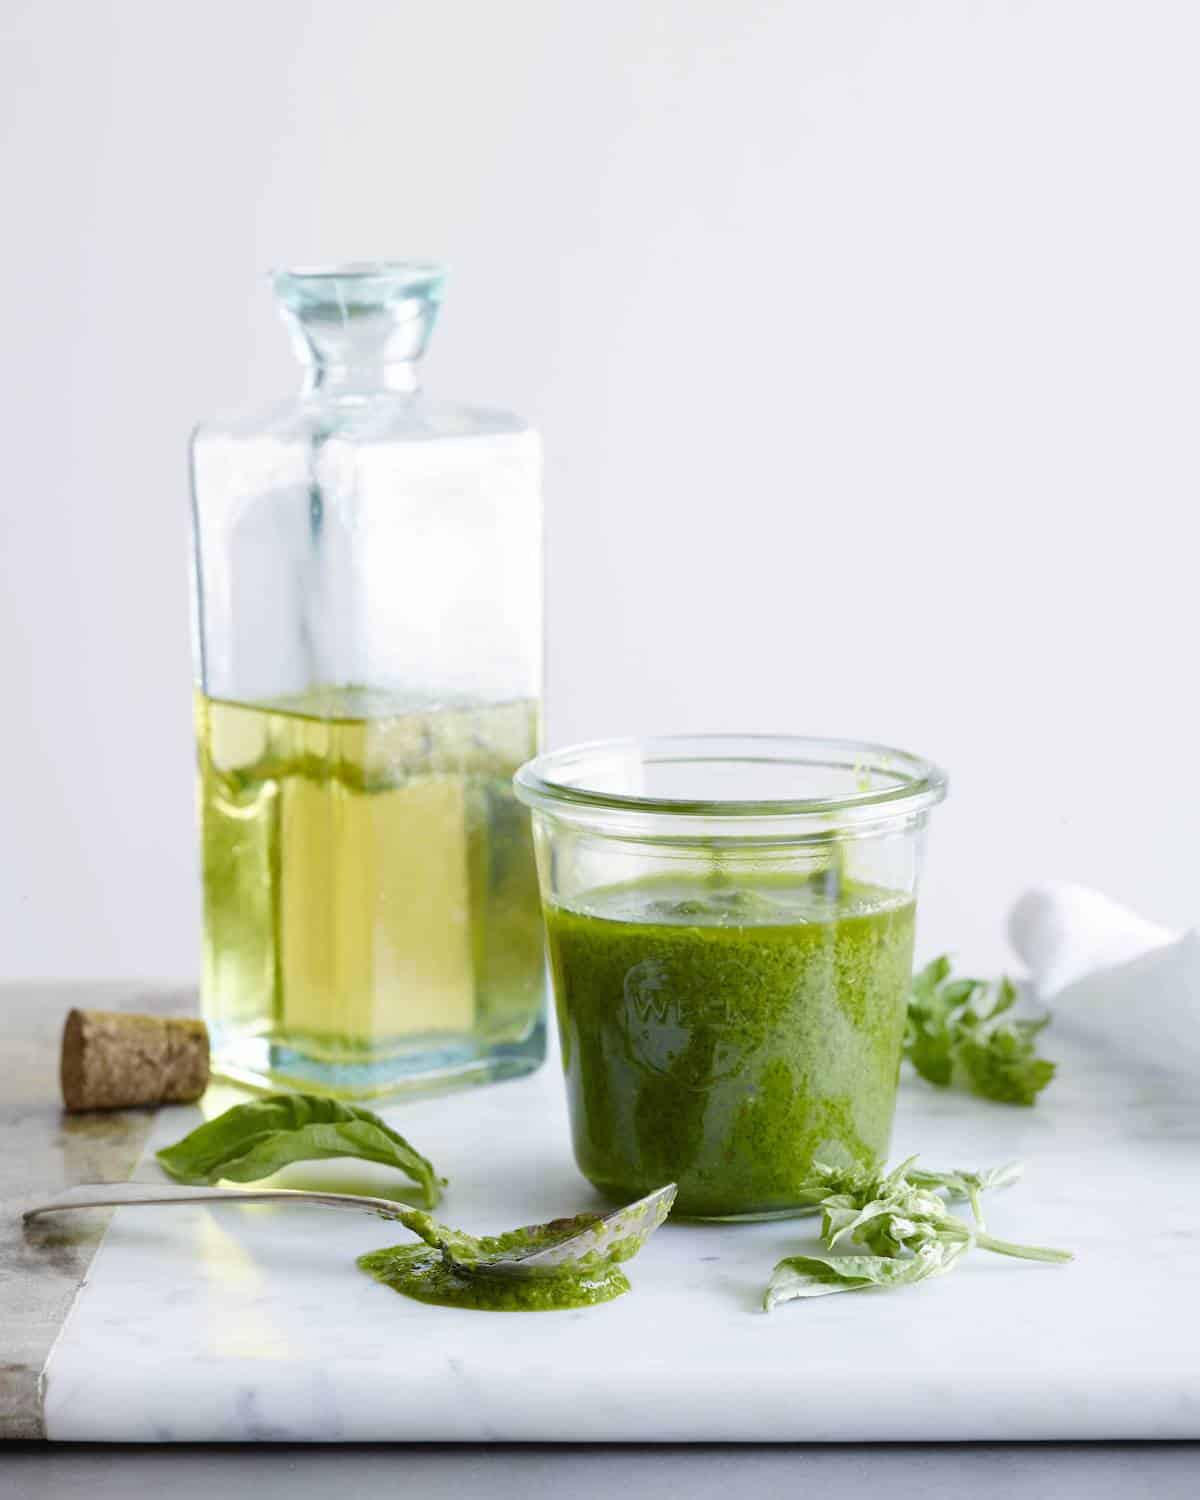 basil vinaigrette recipe in a weck jar with a square glass olive oil bottle in the background, a few basil leaves on the table with a spoon dipped in basil vinaigrette on the table